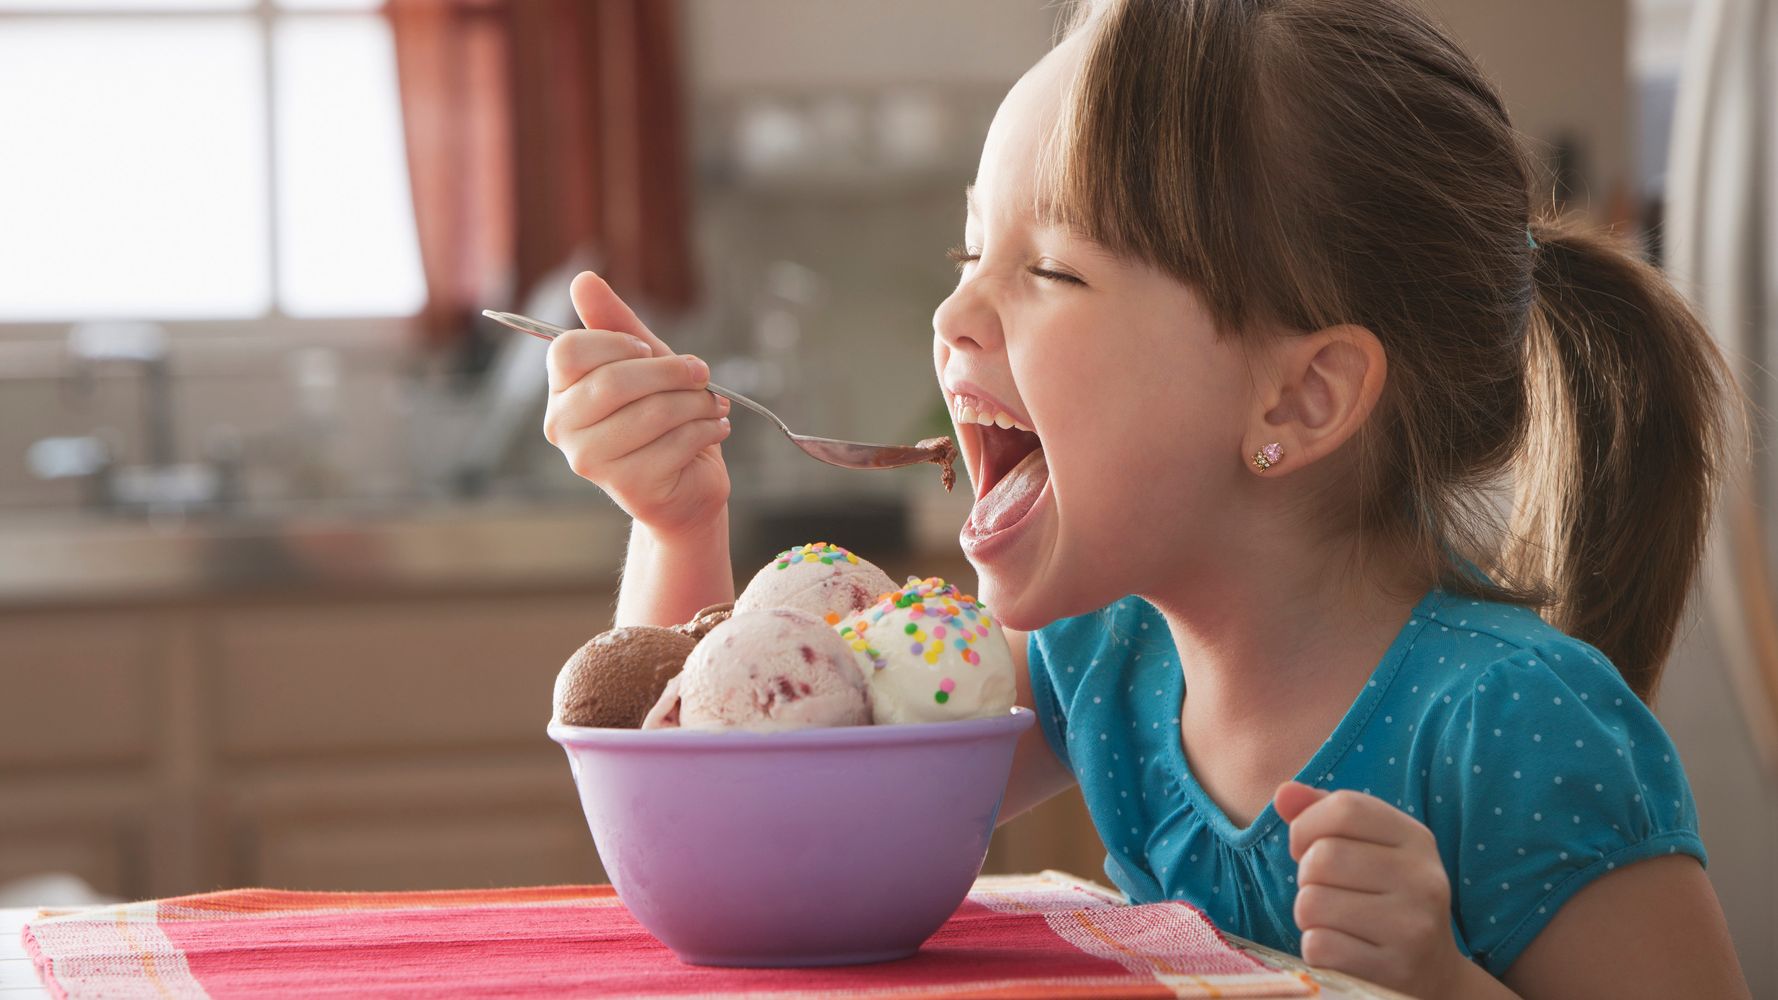 Eating Ice Cream For Breakfast Makes You Smarter, Scientist Claims